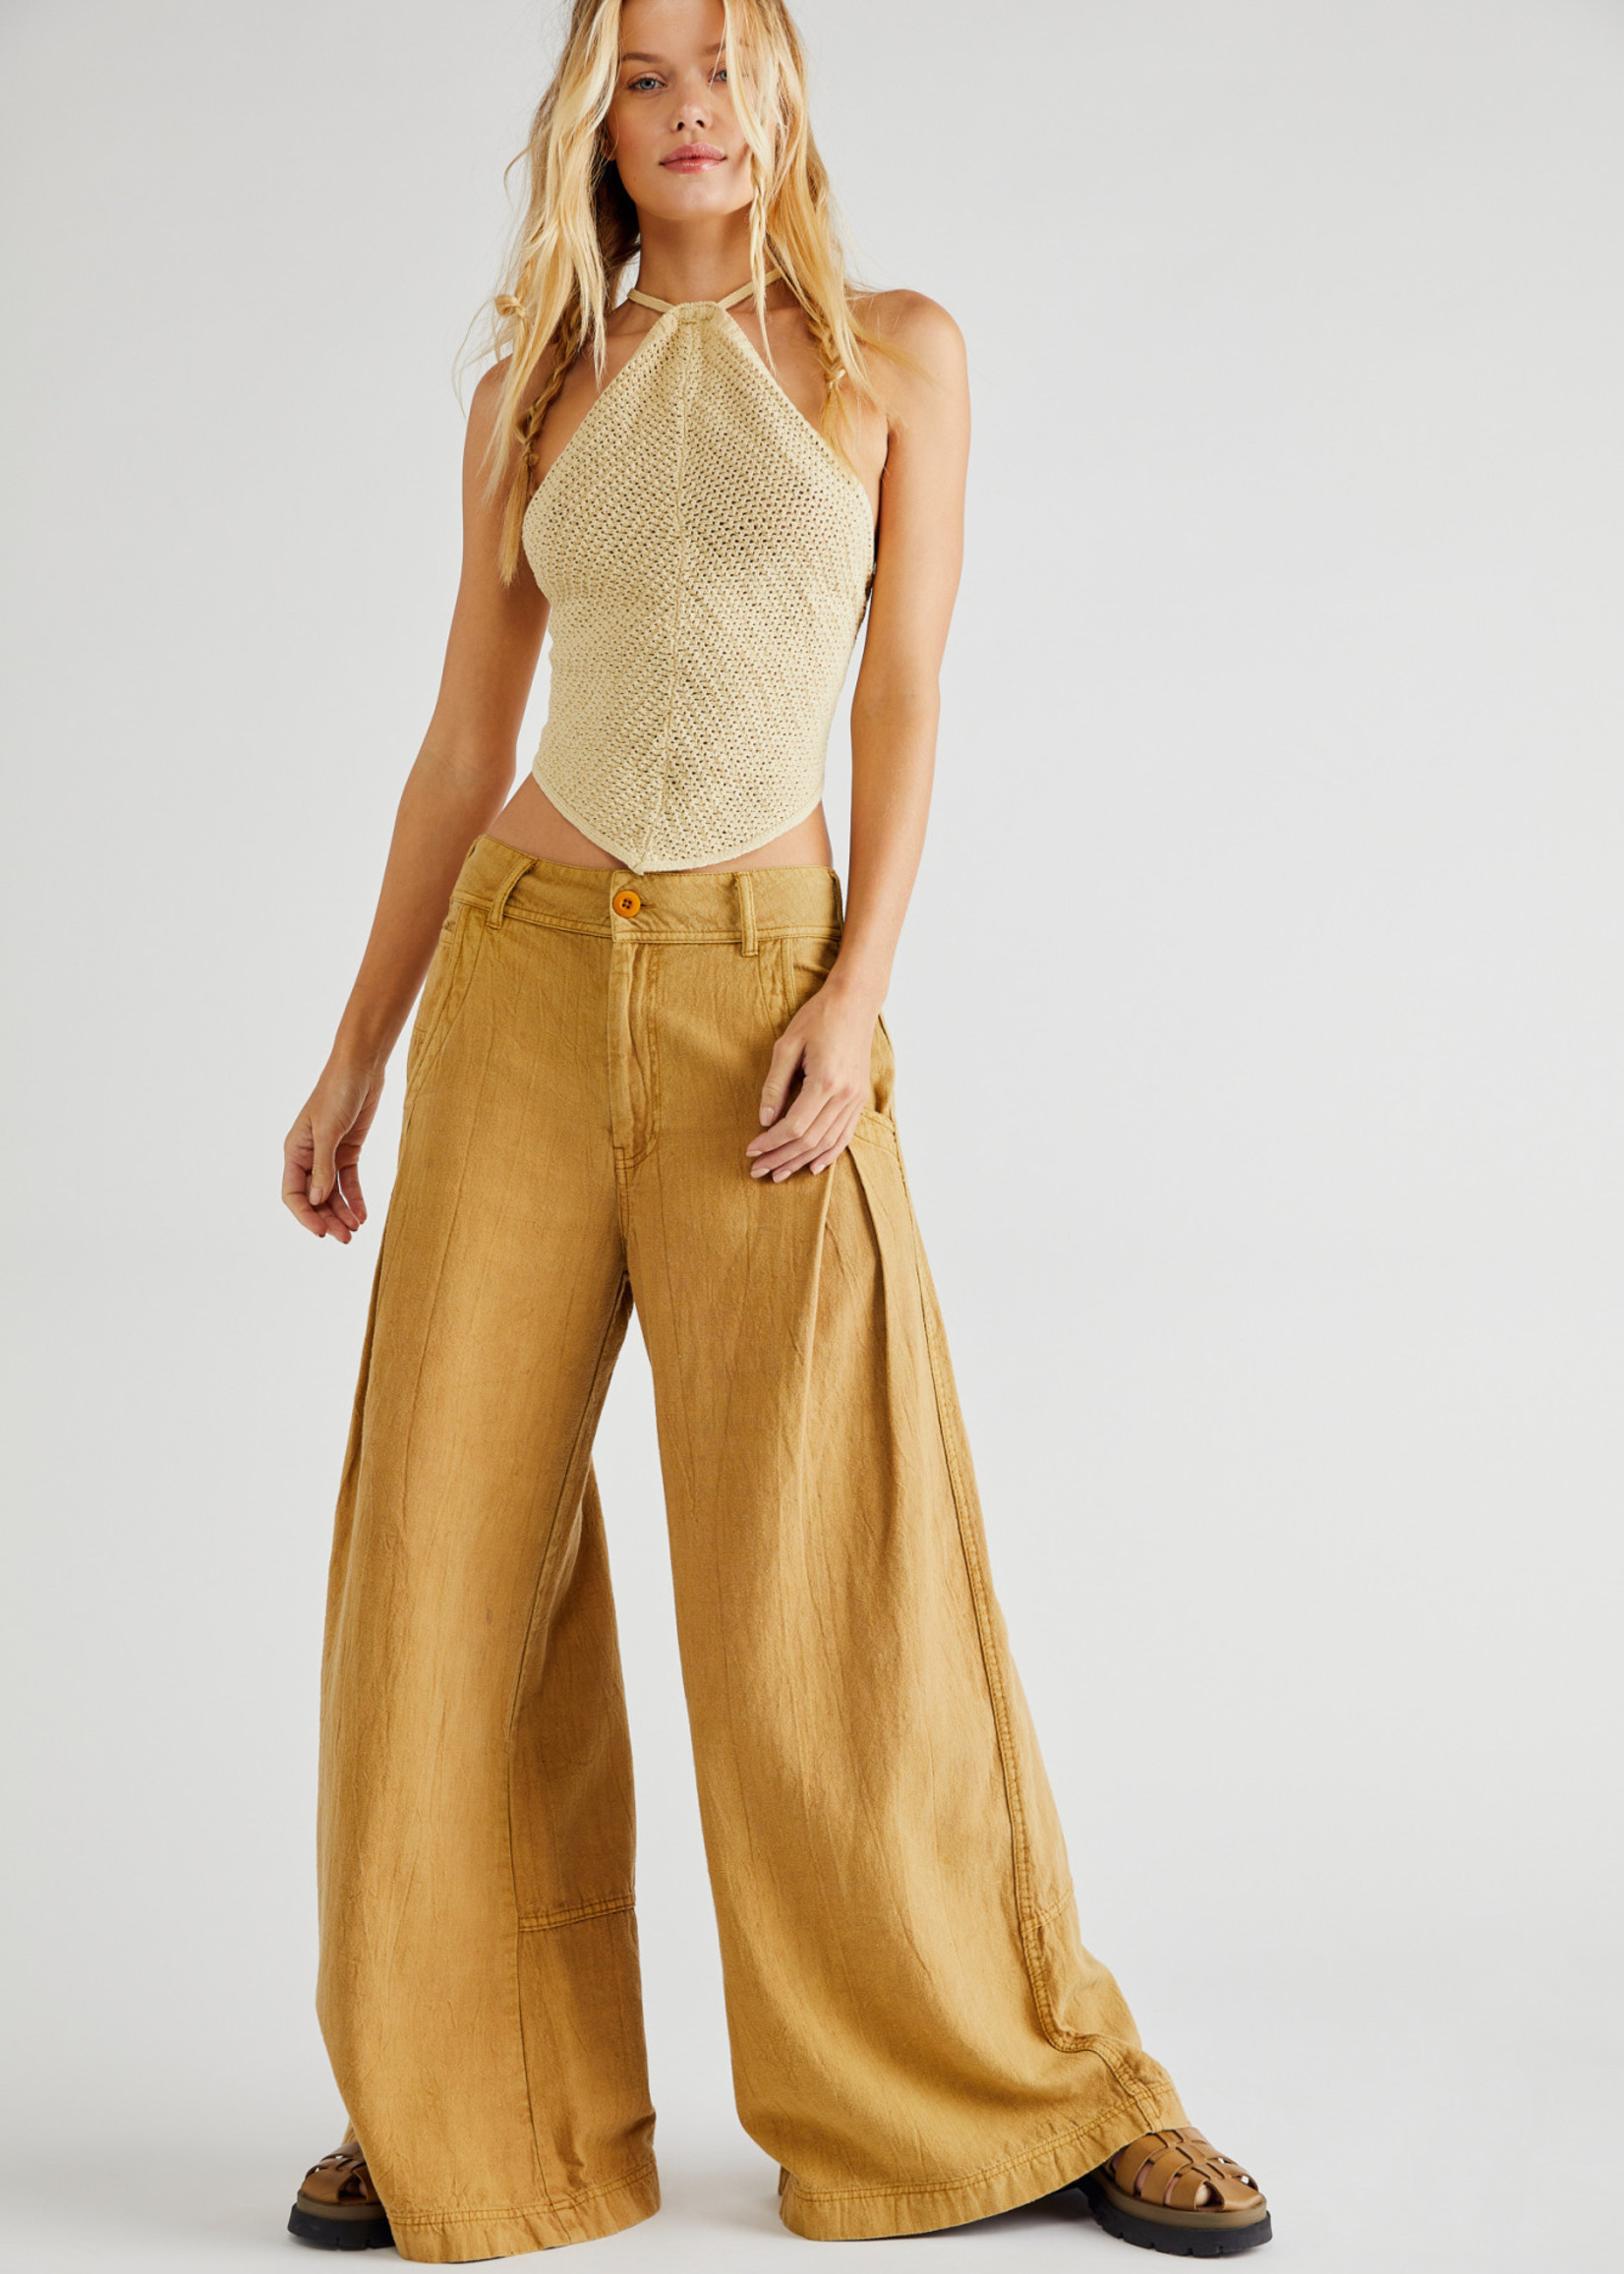 Out Of Touch Extreme Wide Leg Pants // Free People *2-10